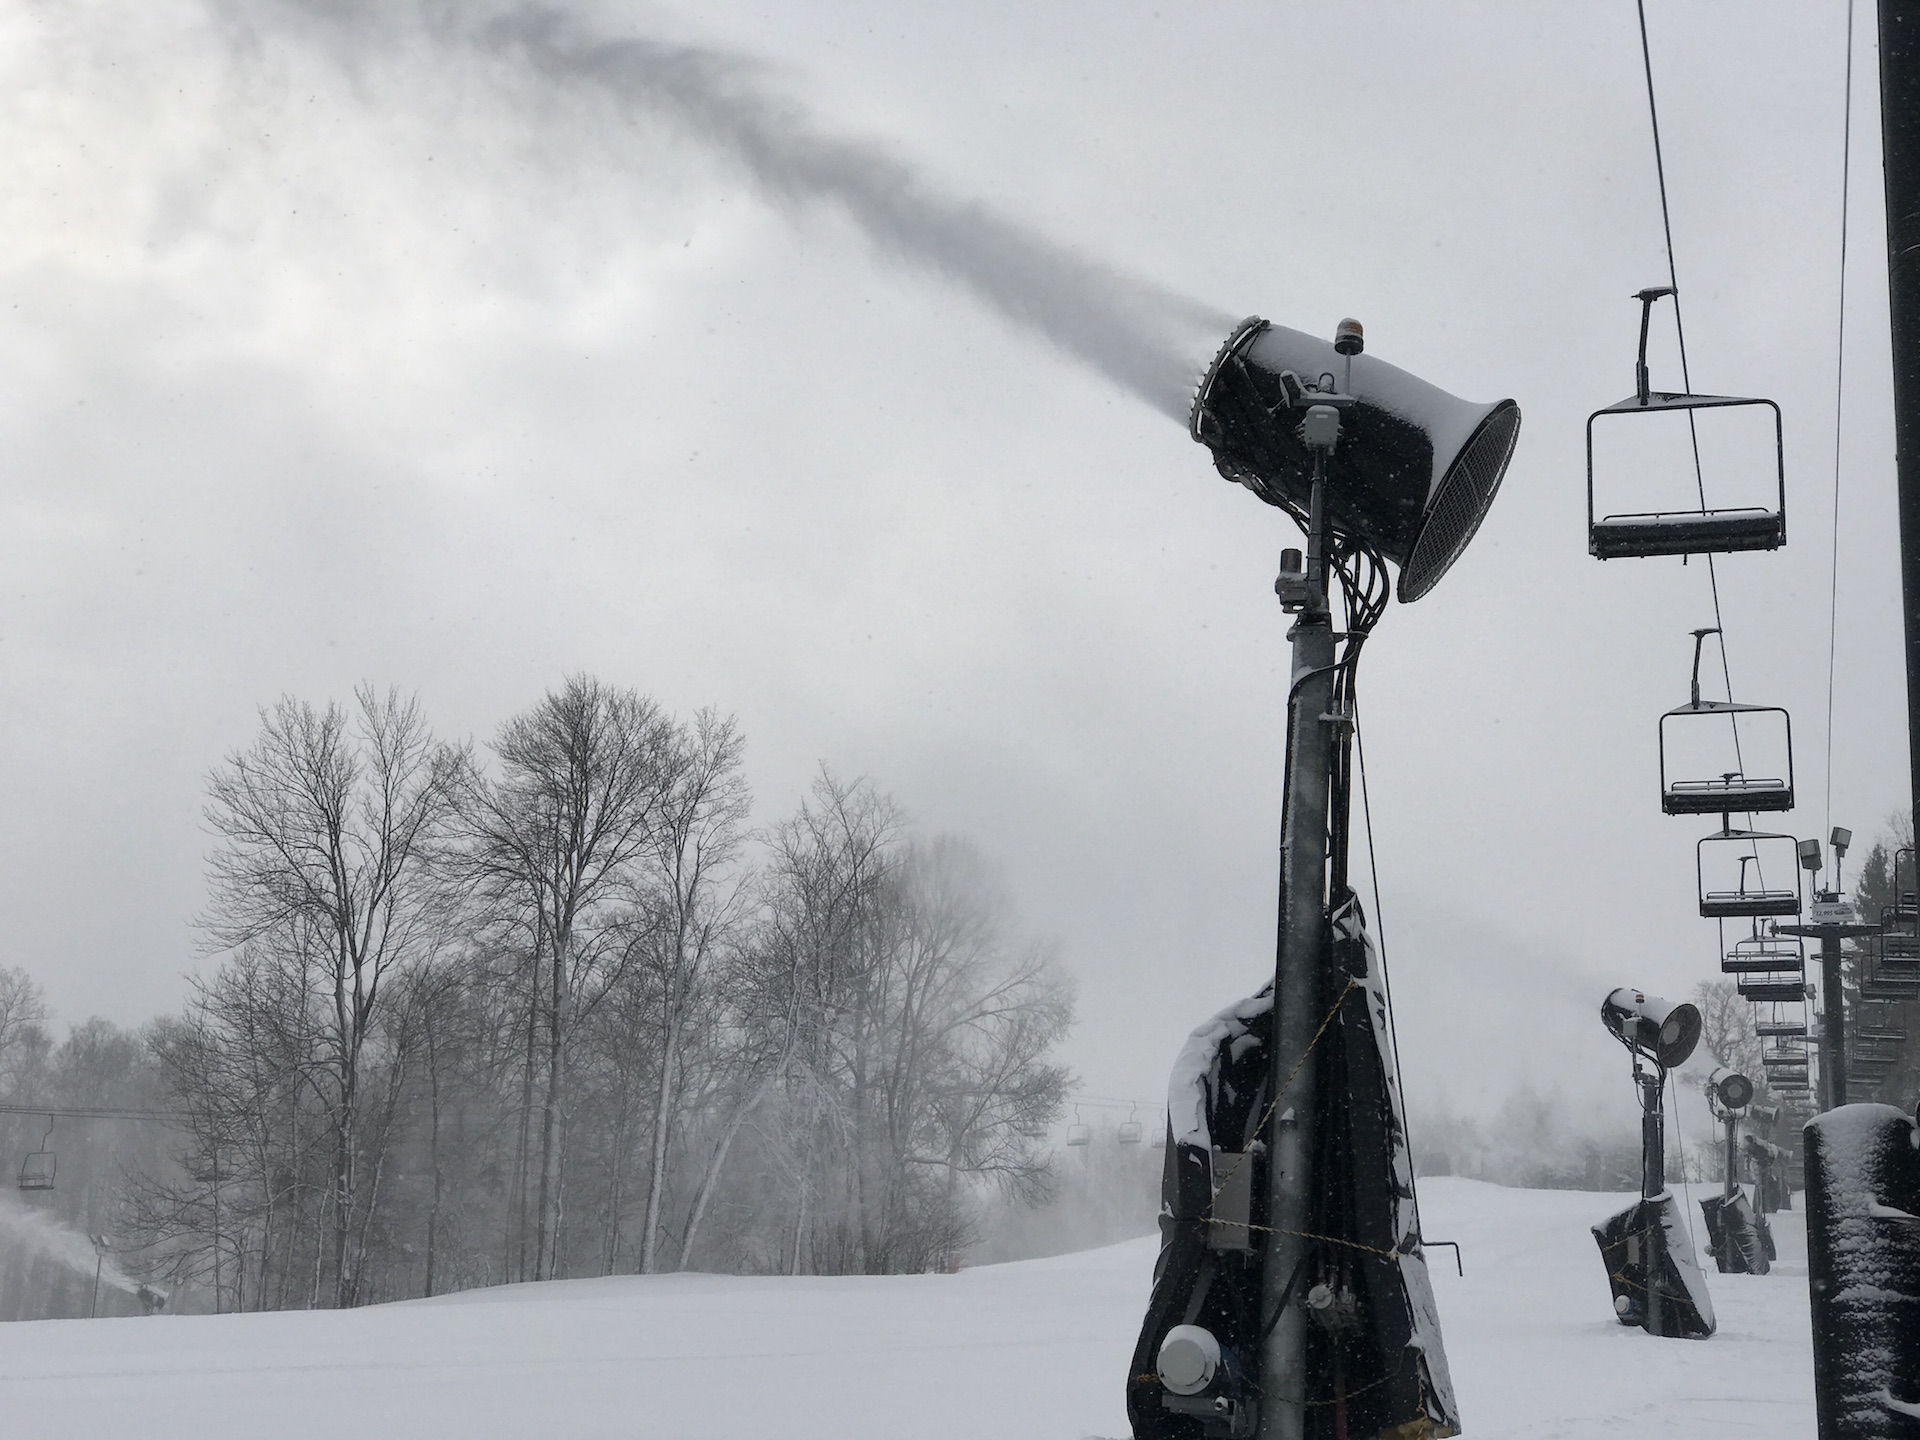 Snowmaking on our Competition Slope here at Snow Trails in Mansfield, Ohio